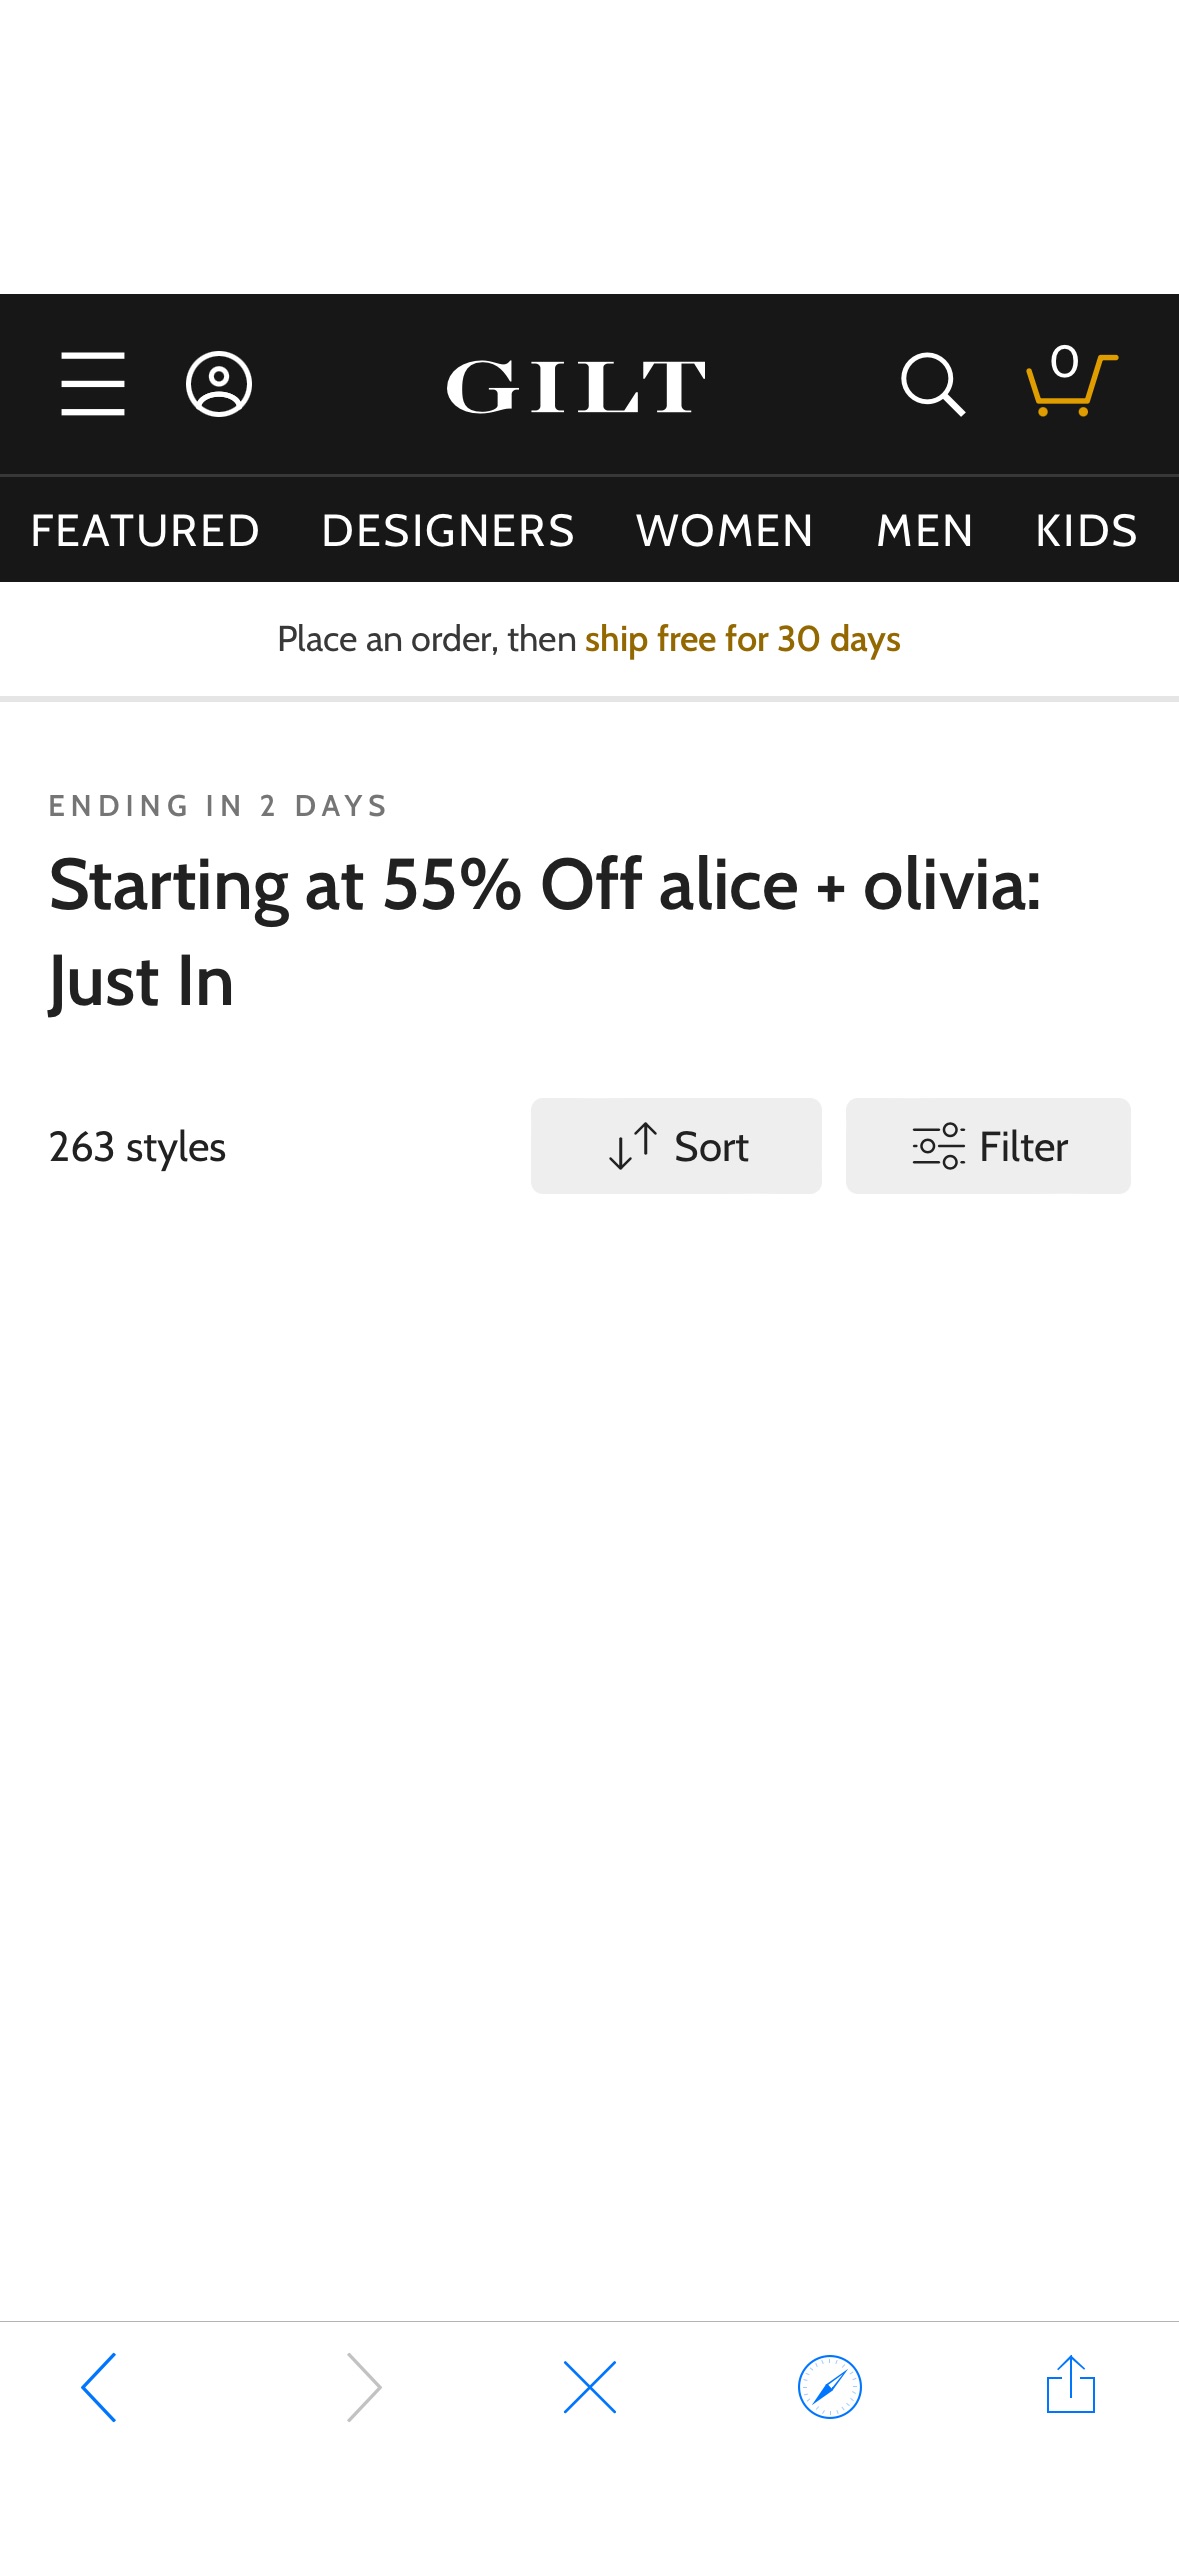 Starting at 55% Off alice + olivia: Just In / Gilt